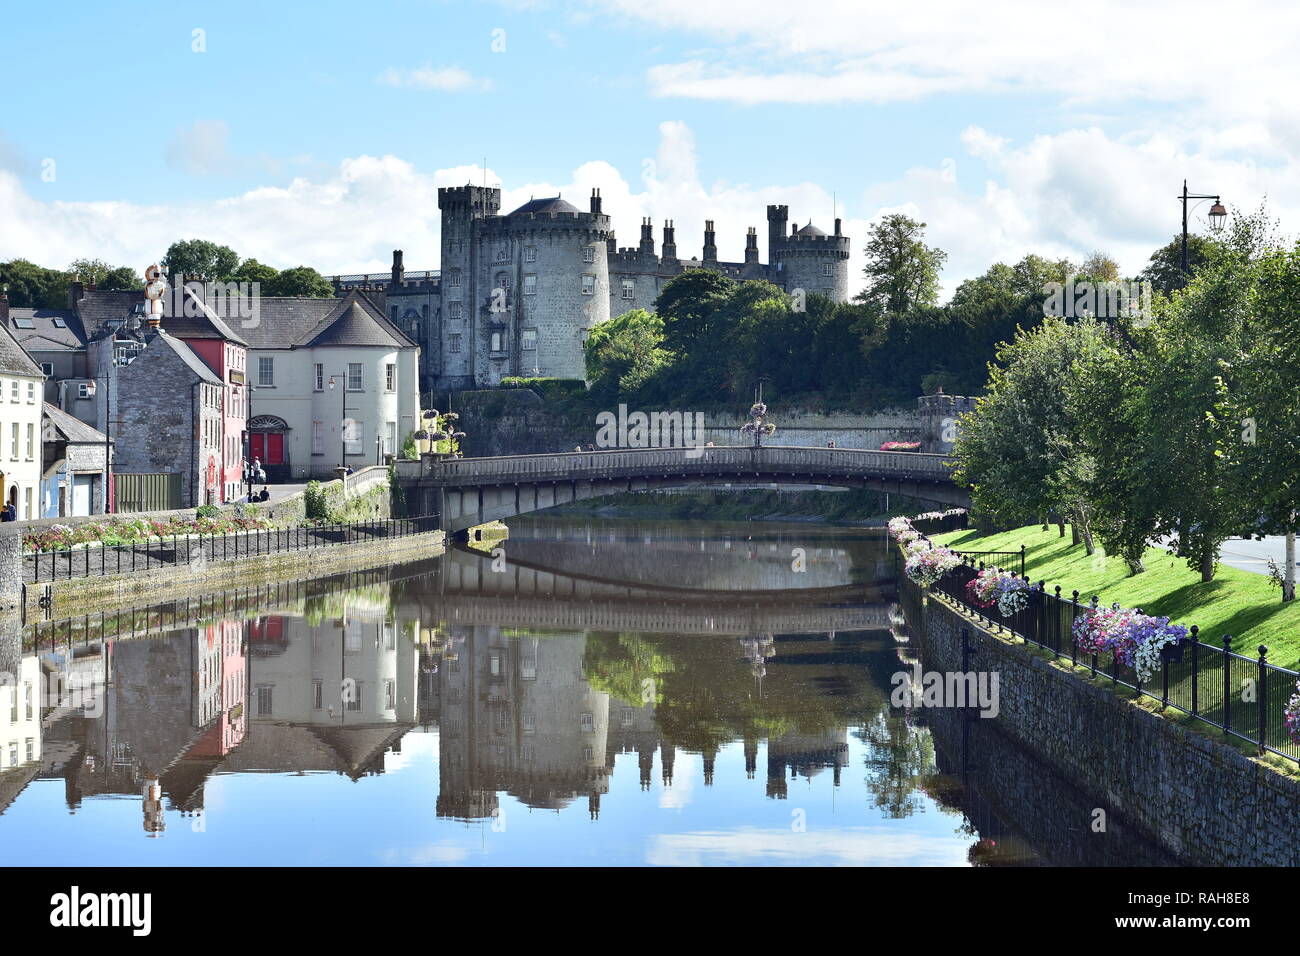 View of calm river Nore with bridge and stone Kilkenny Castle in background. Stock Photo